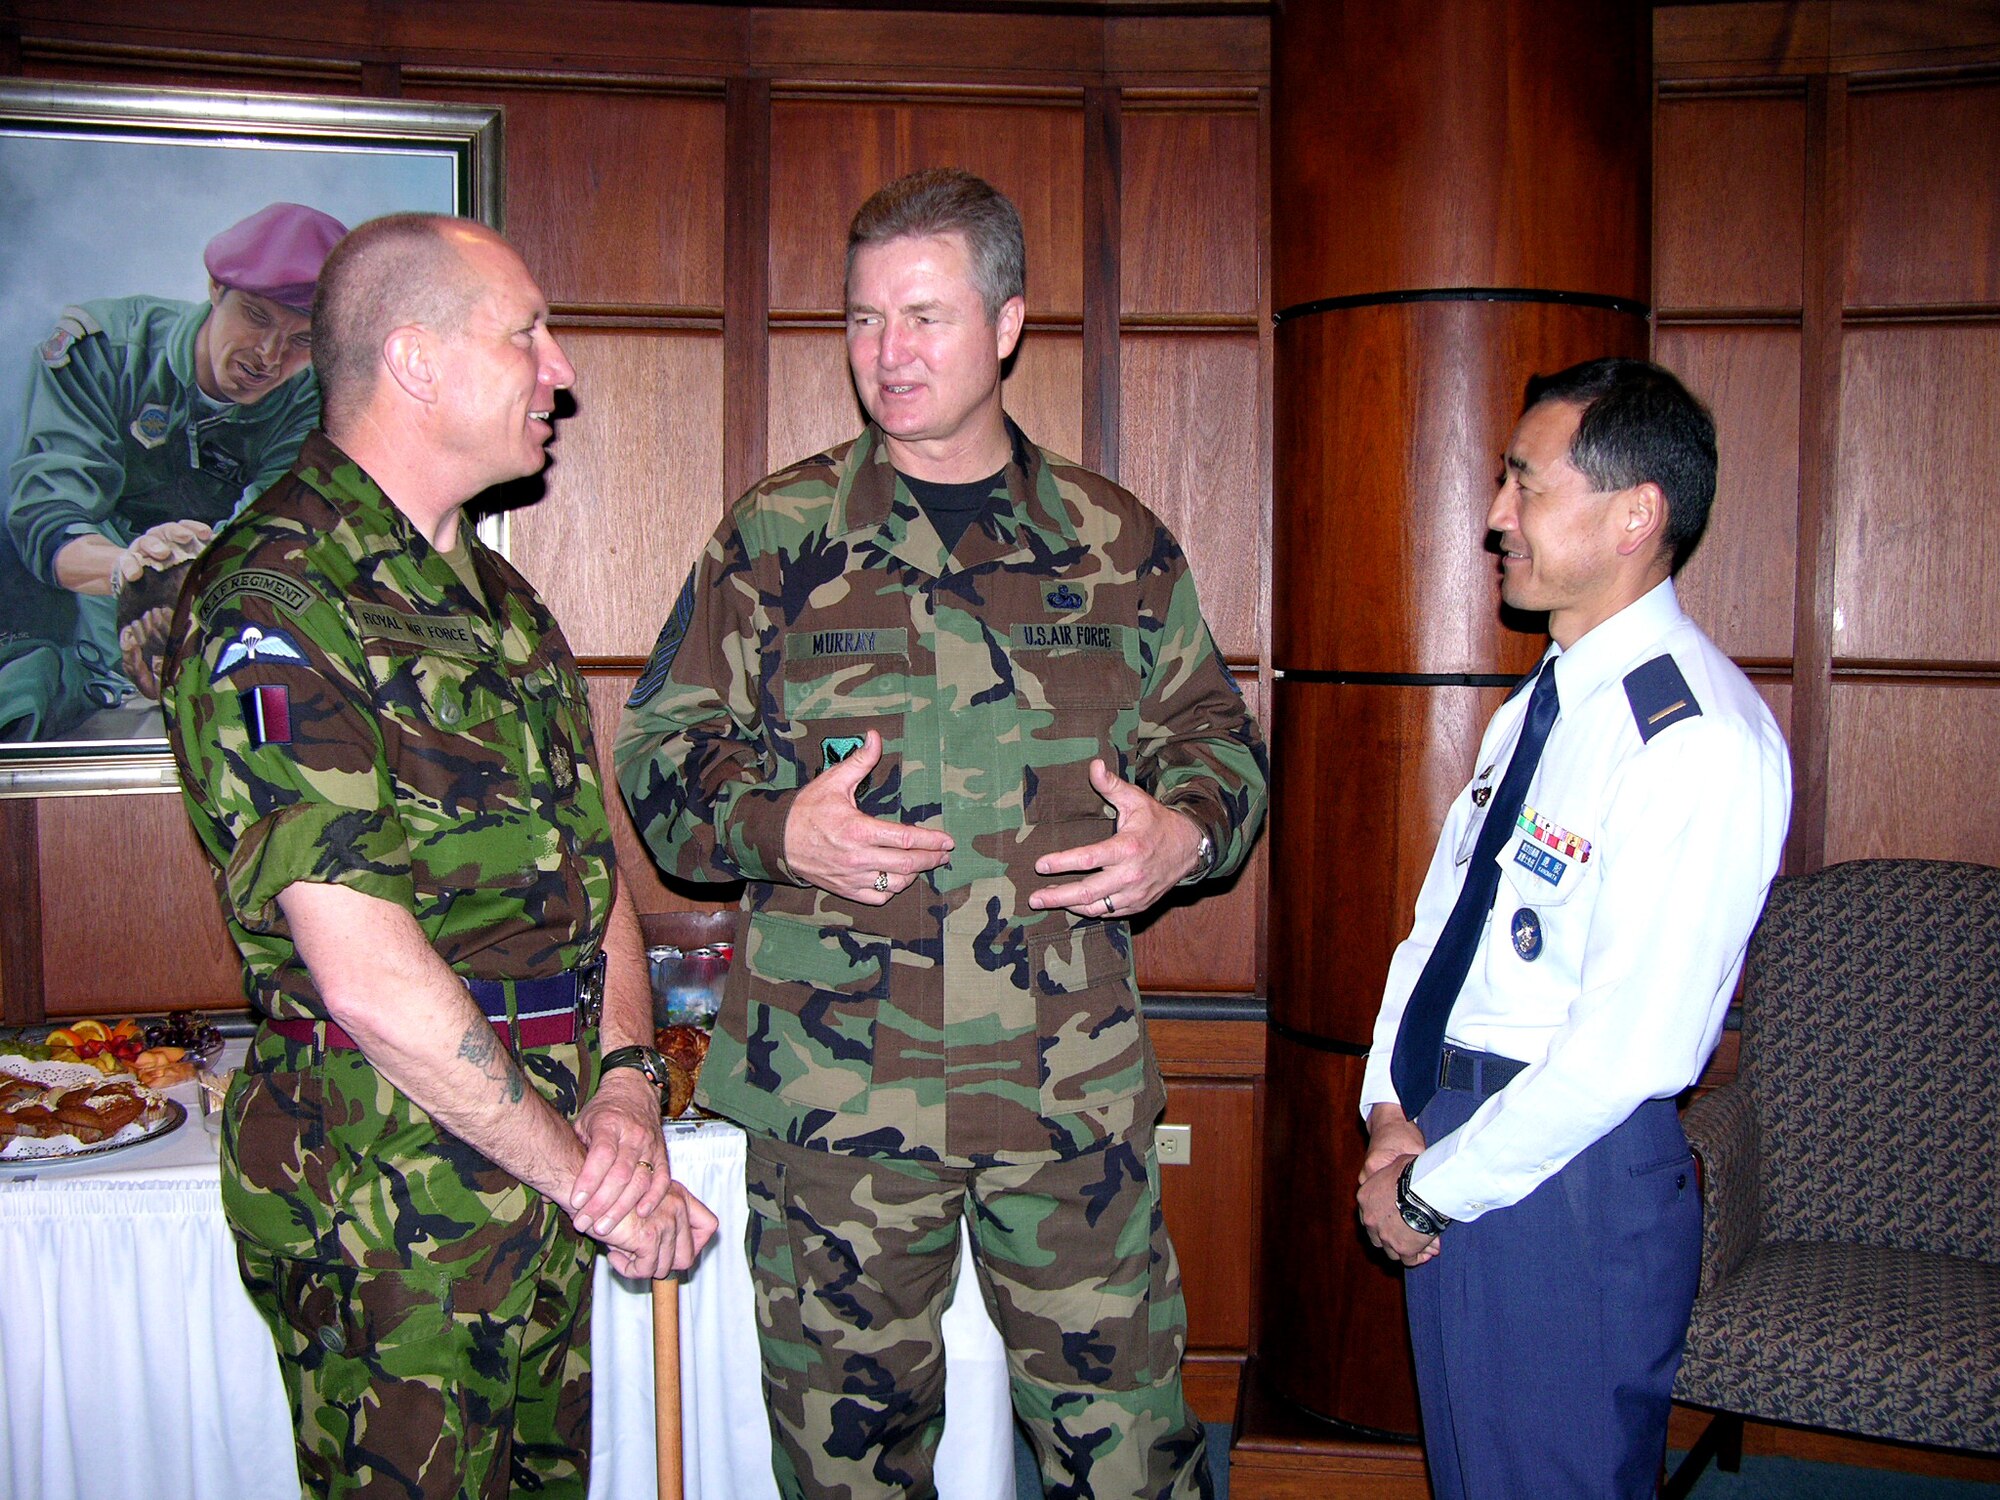 Chief Master Sgt. of the Air Force Gerald R. Murray discusses the progress of the Worldwide Command Chiefs Conference with his British counterpart, Warrant Officer Bob Loughlin, and his Japanese counterpart, Warrant Officer Ryuichi Kanomata, during a break at the Air Force Senior NCO Academy at Maxwell-Gunter Air Force Base, Ala., on Monday, April 24, 2006.  (U.S. Air Force photo)